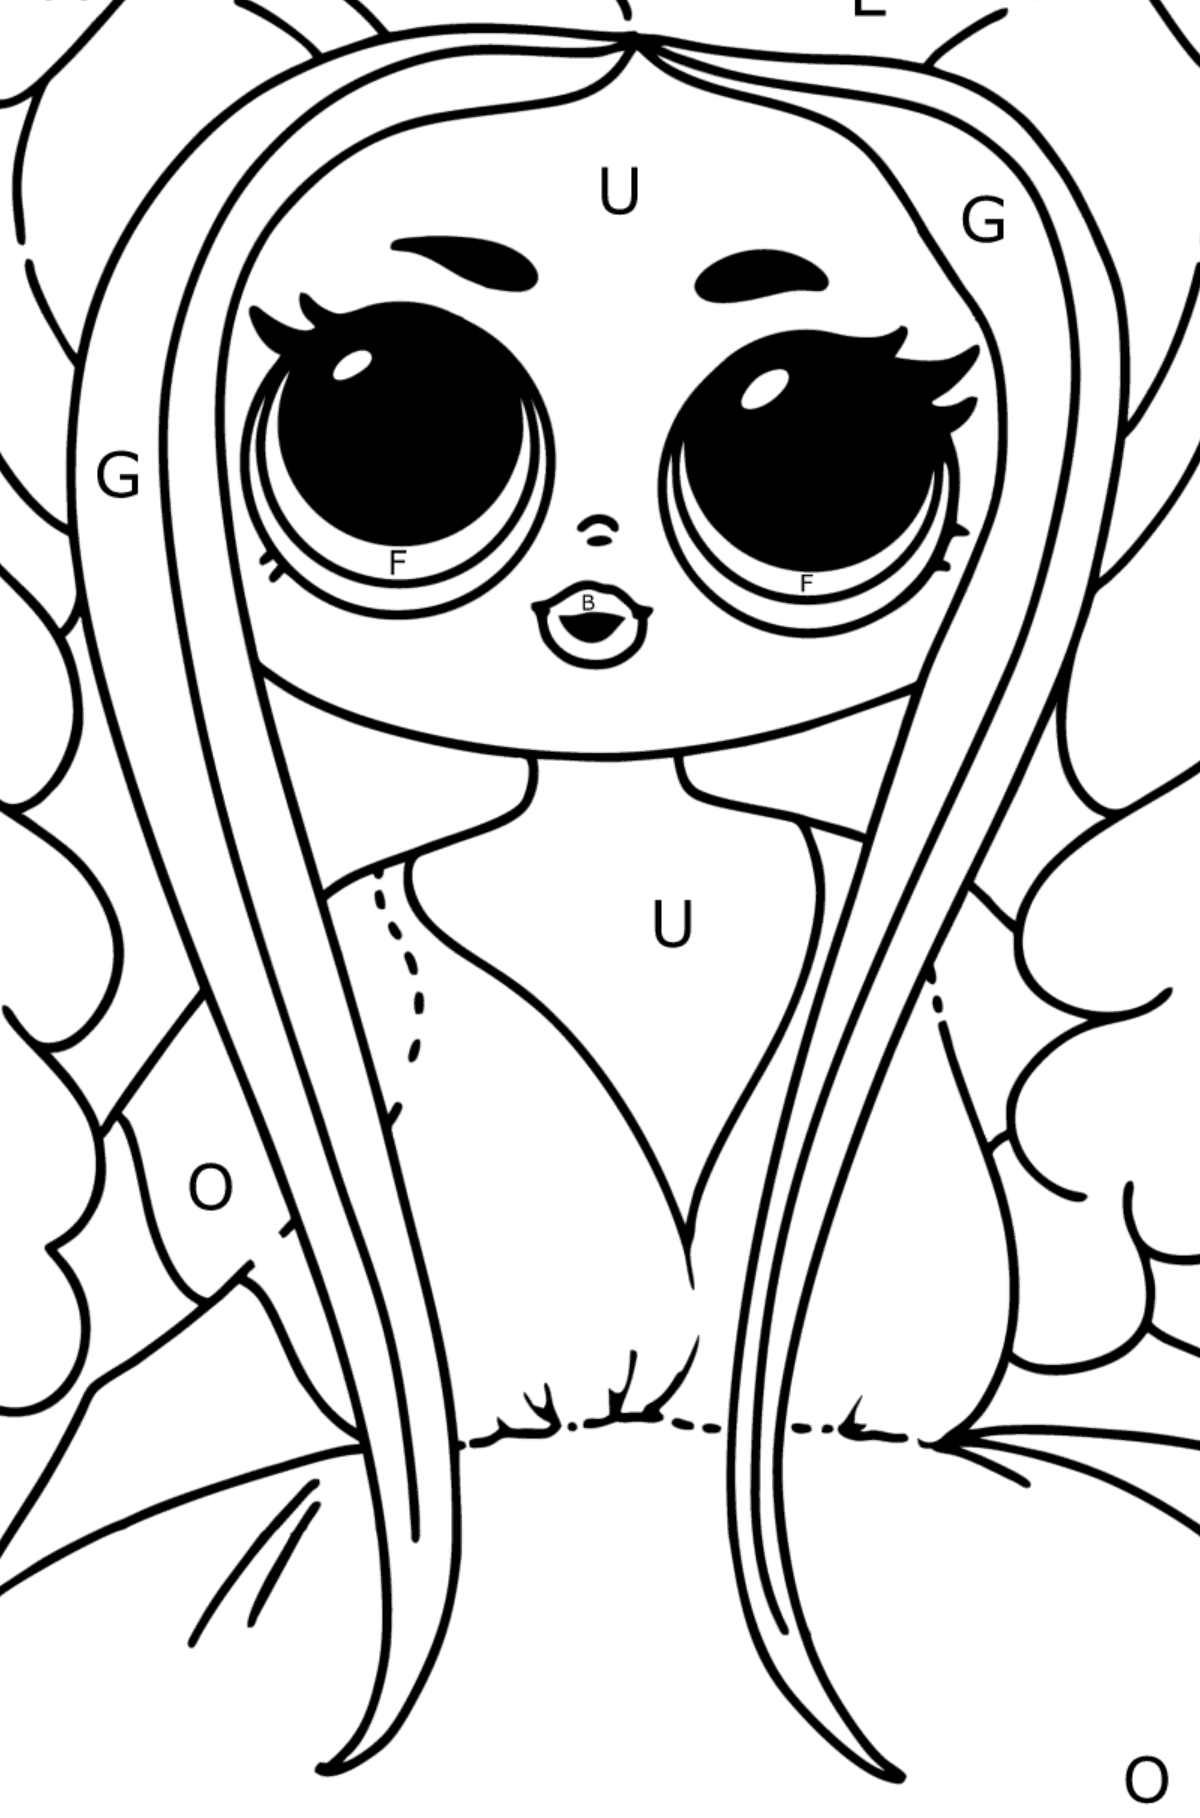 Coloring page LOL OMG Honeylicious Doll - Coloring by Letters for Kids